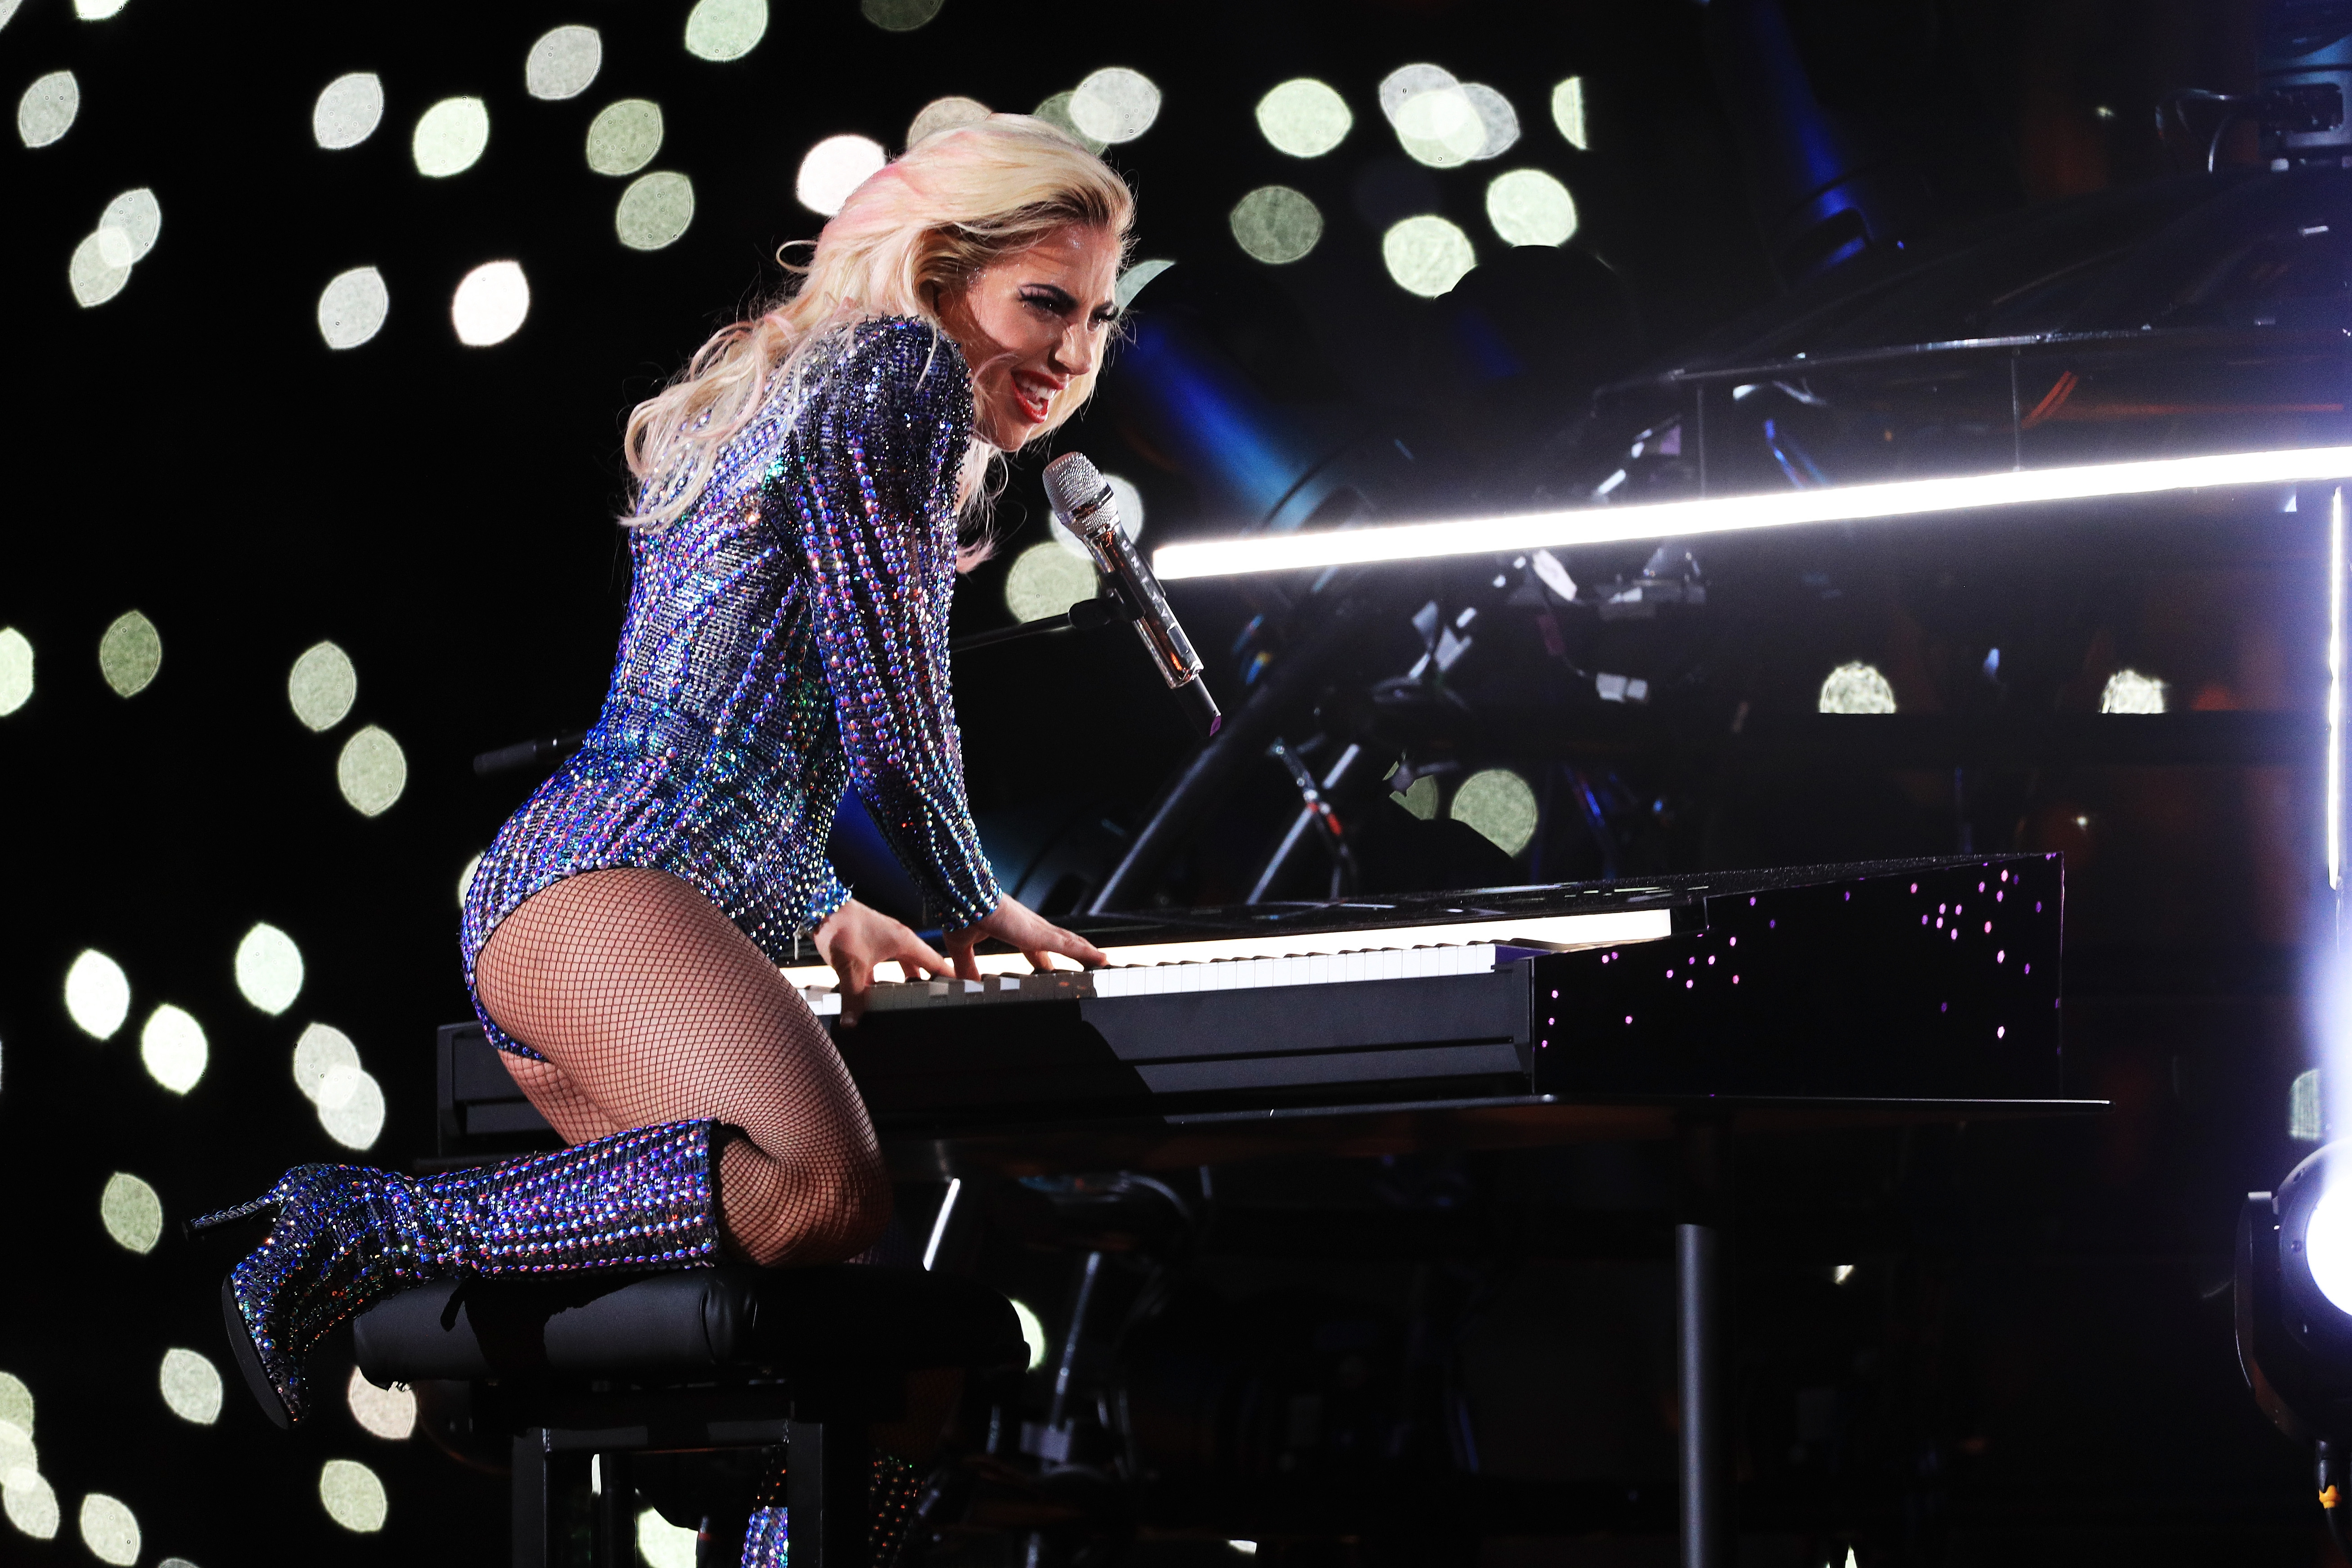 HOUSTON, TX - FEBRUARY 05: Lady Gaga performs during the Pepsi Zero Sugar Super Bowl 51 Halftime Show at NRG Stadium on February 5, 2017 in Houston, Texas. (Photo by Mike Ehrmann/Getty Images)